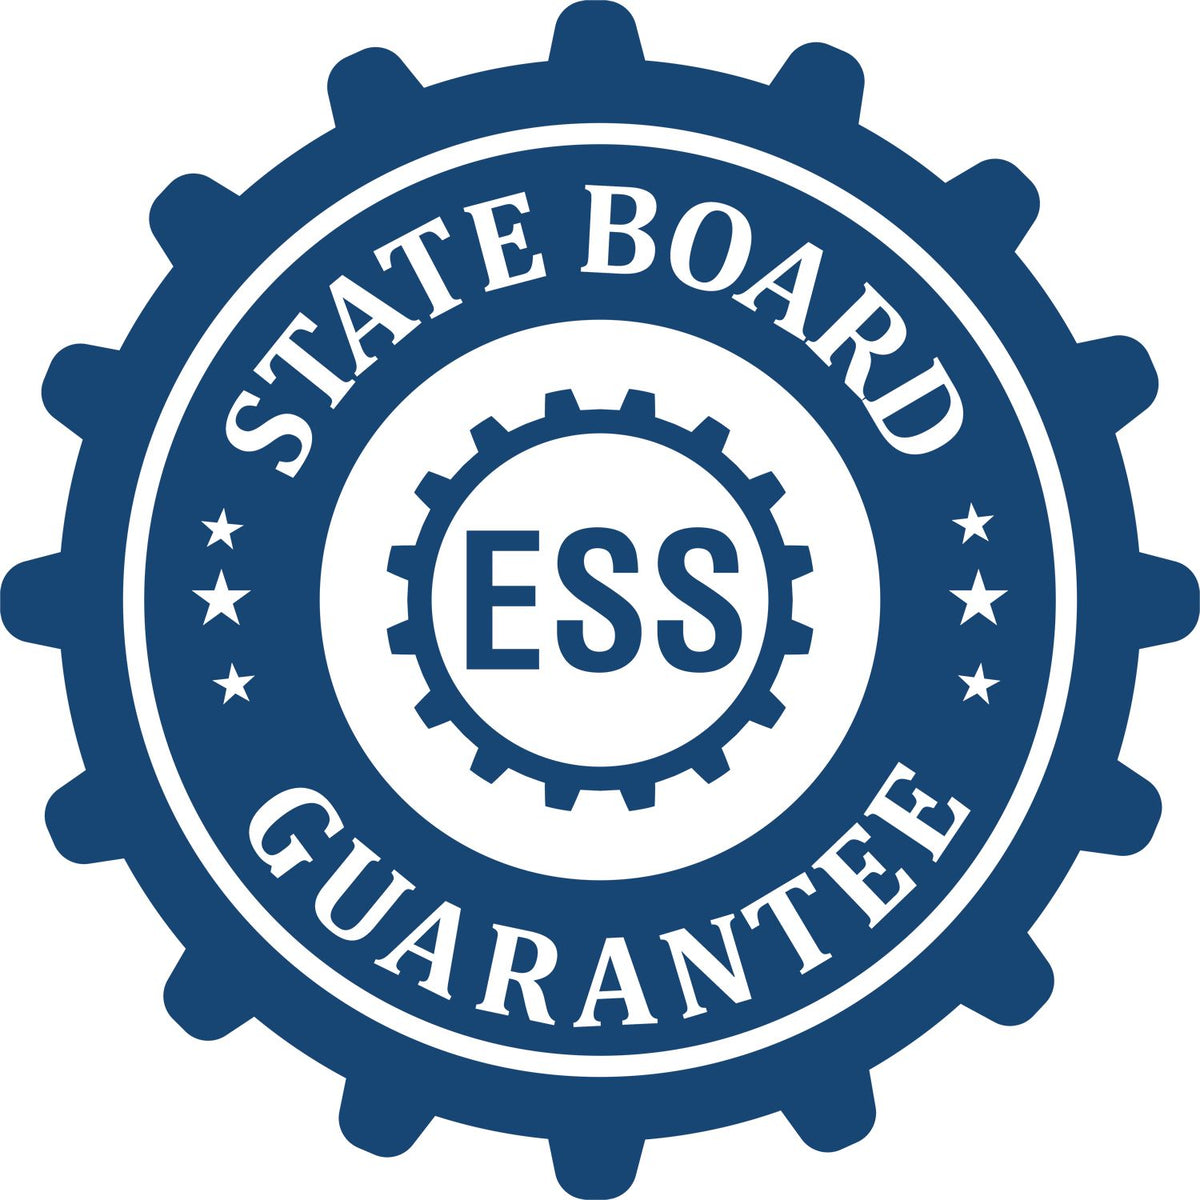 An emblem in a gear shape illustrating a state board guarantee for the Hybrid Alaska Landscape Architect Seal